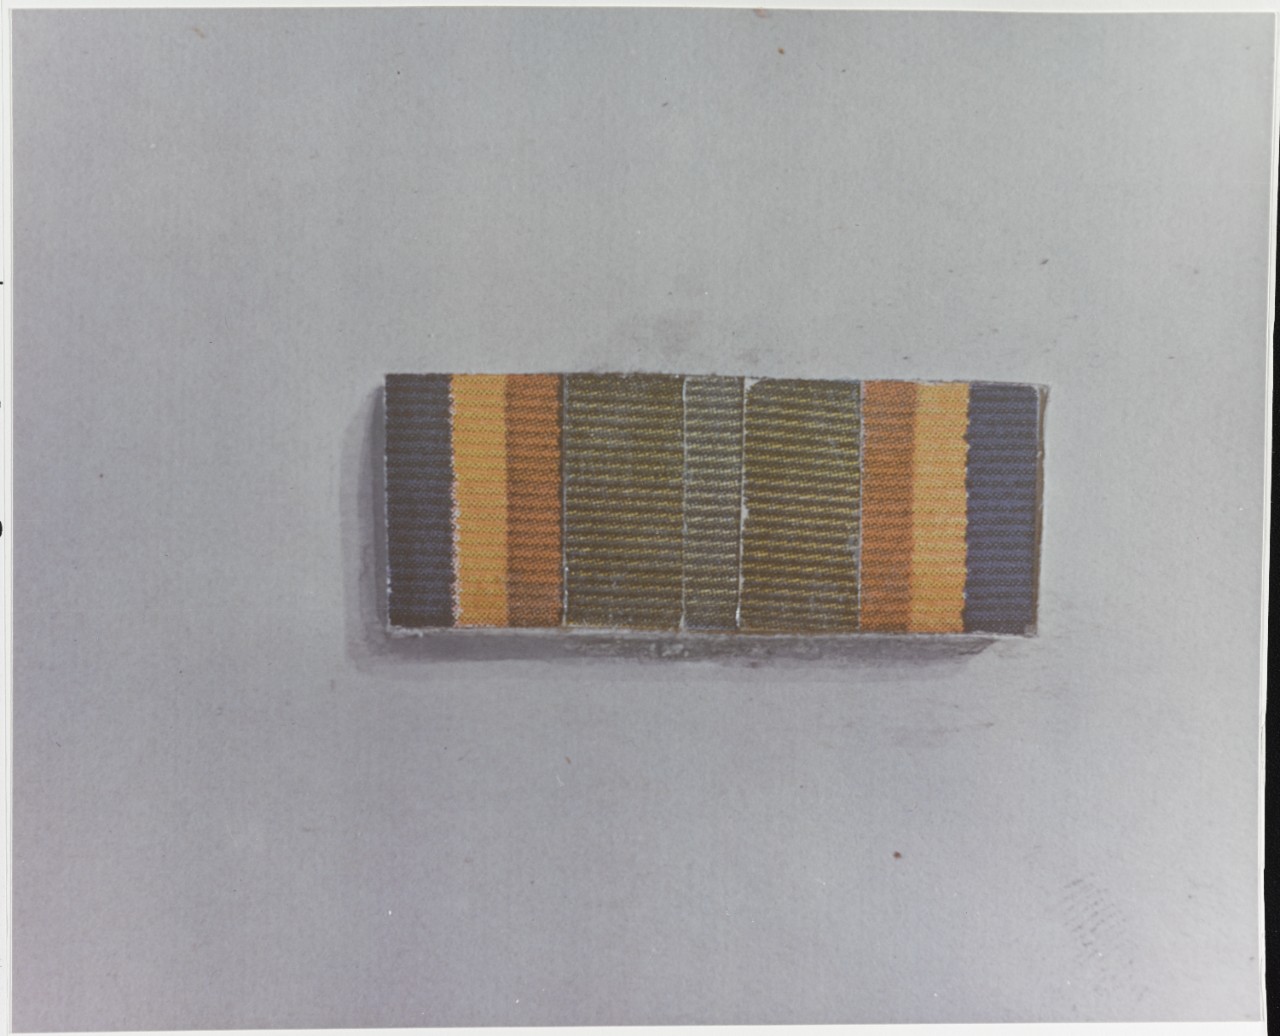 Mockup of service ribbon for the Navy unit commendation award.